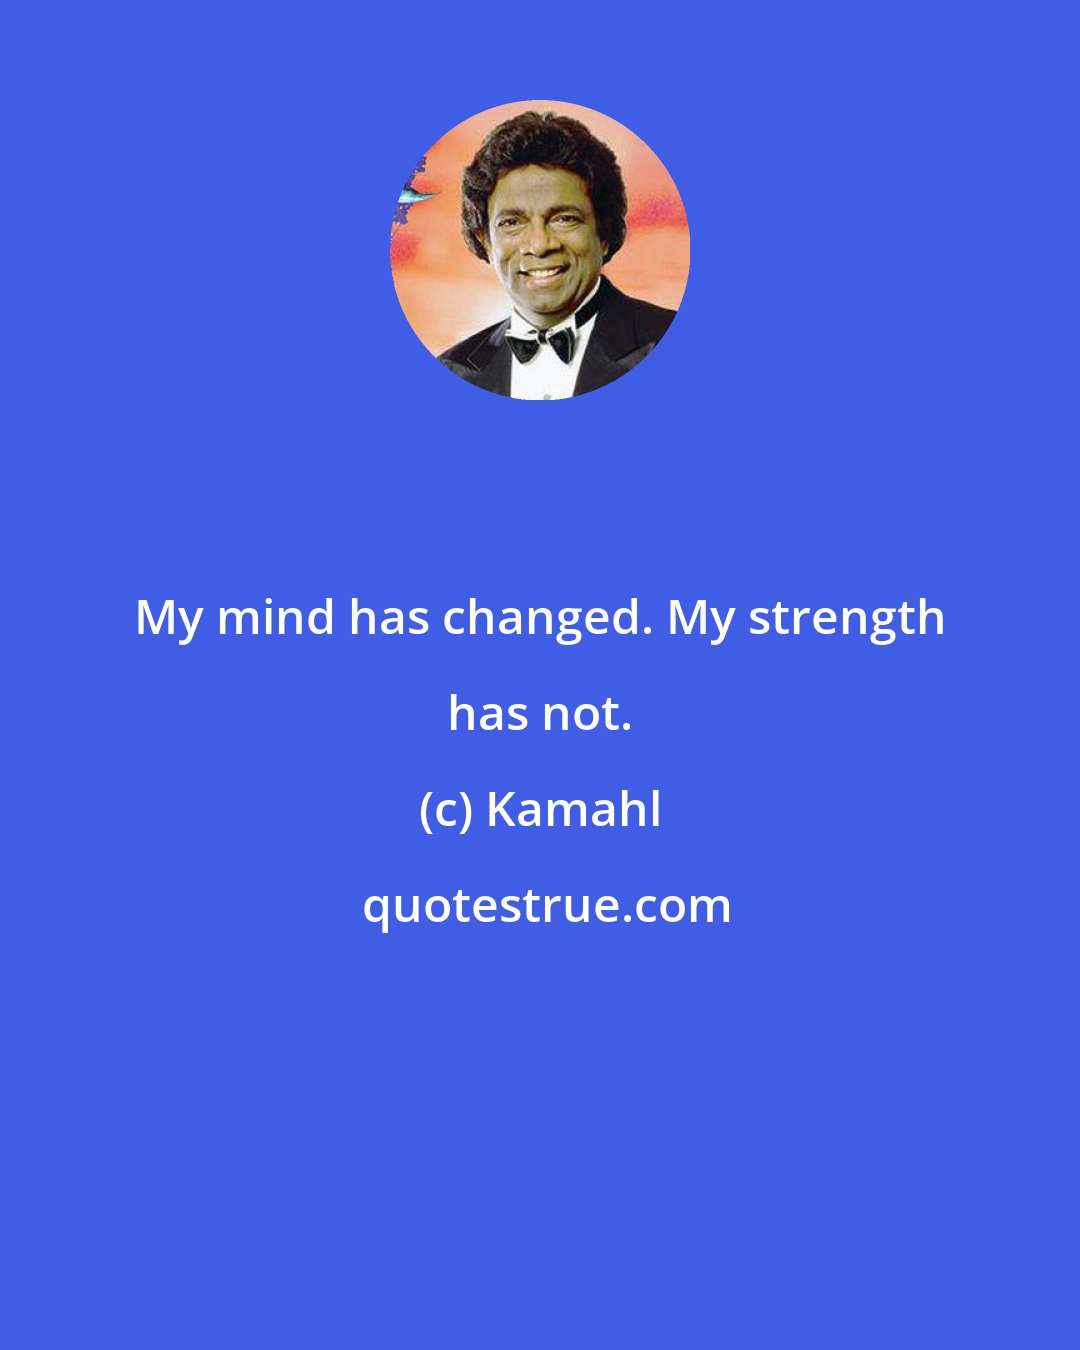 Kamahl: My mind has changed. My strength has not.